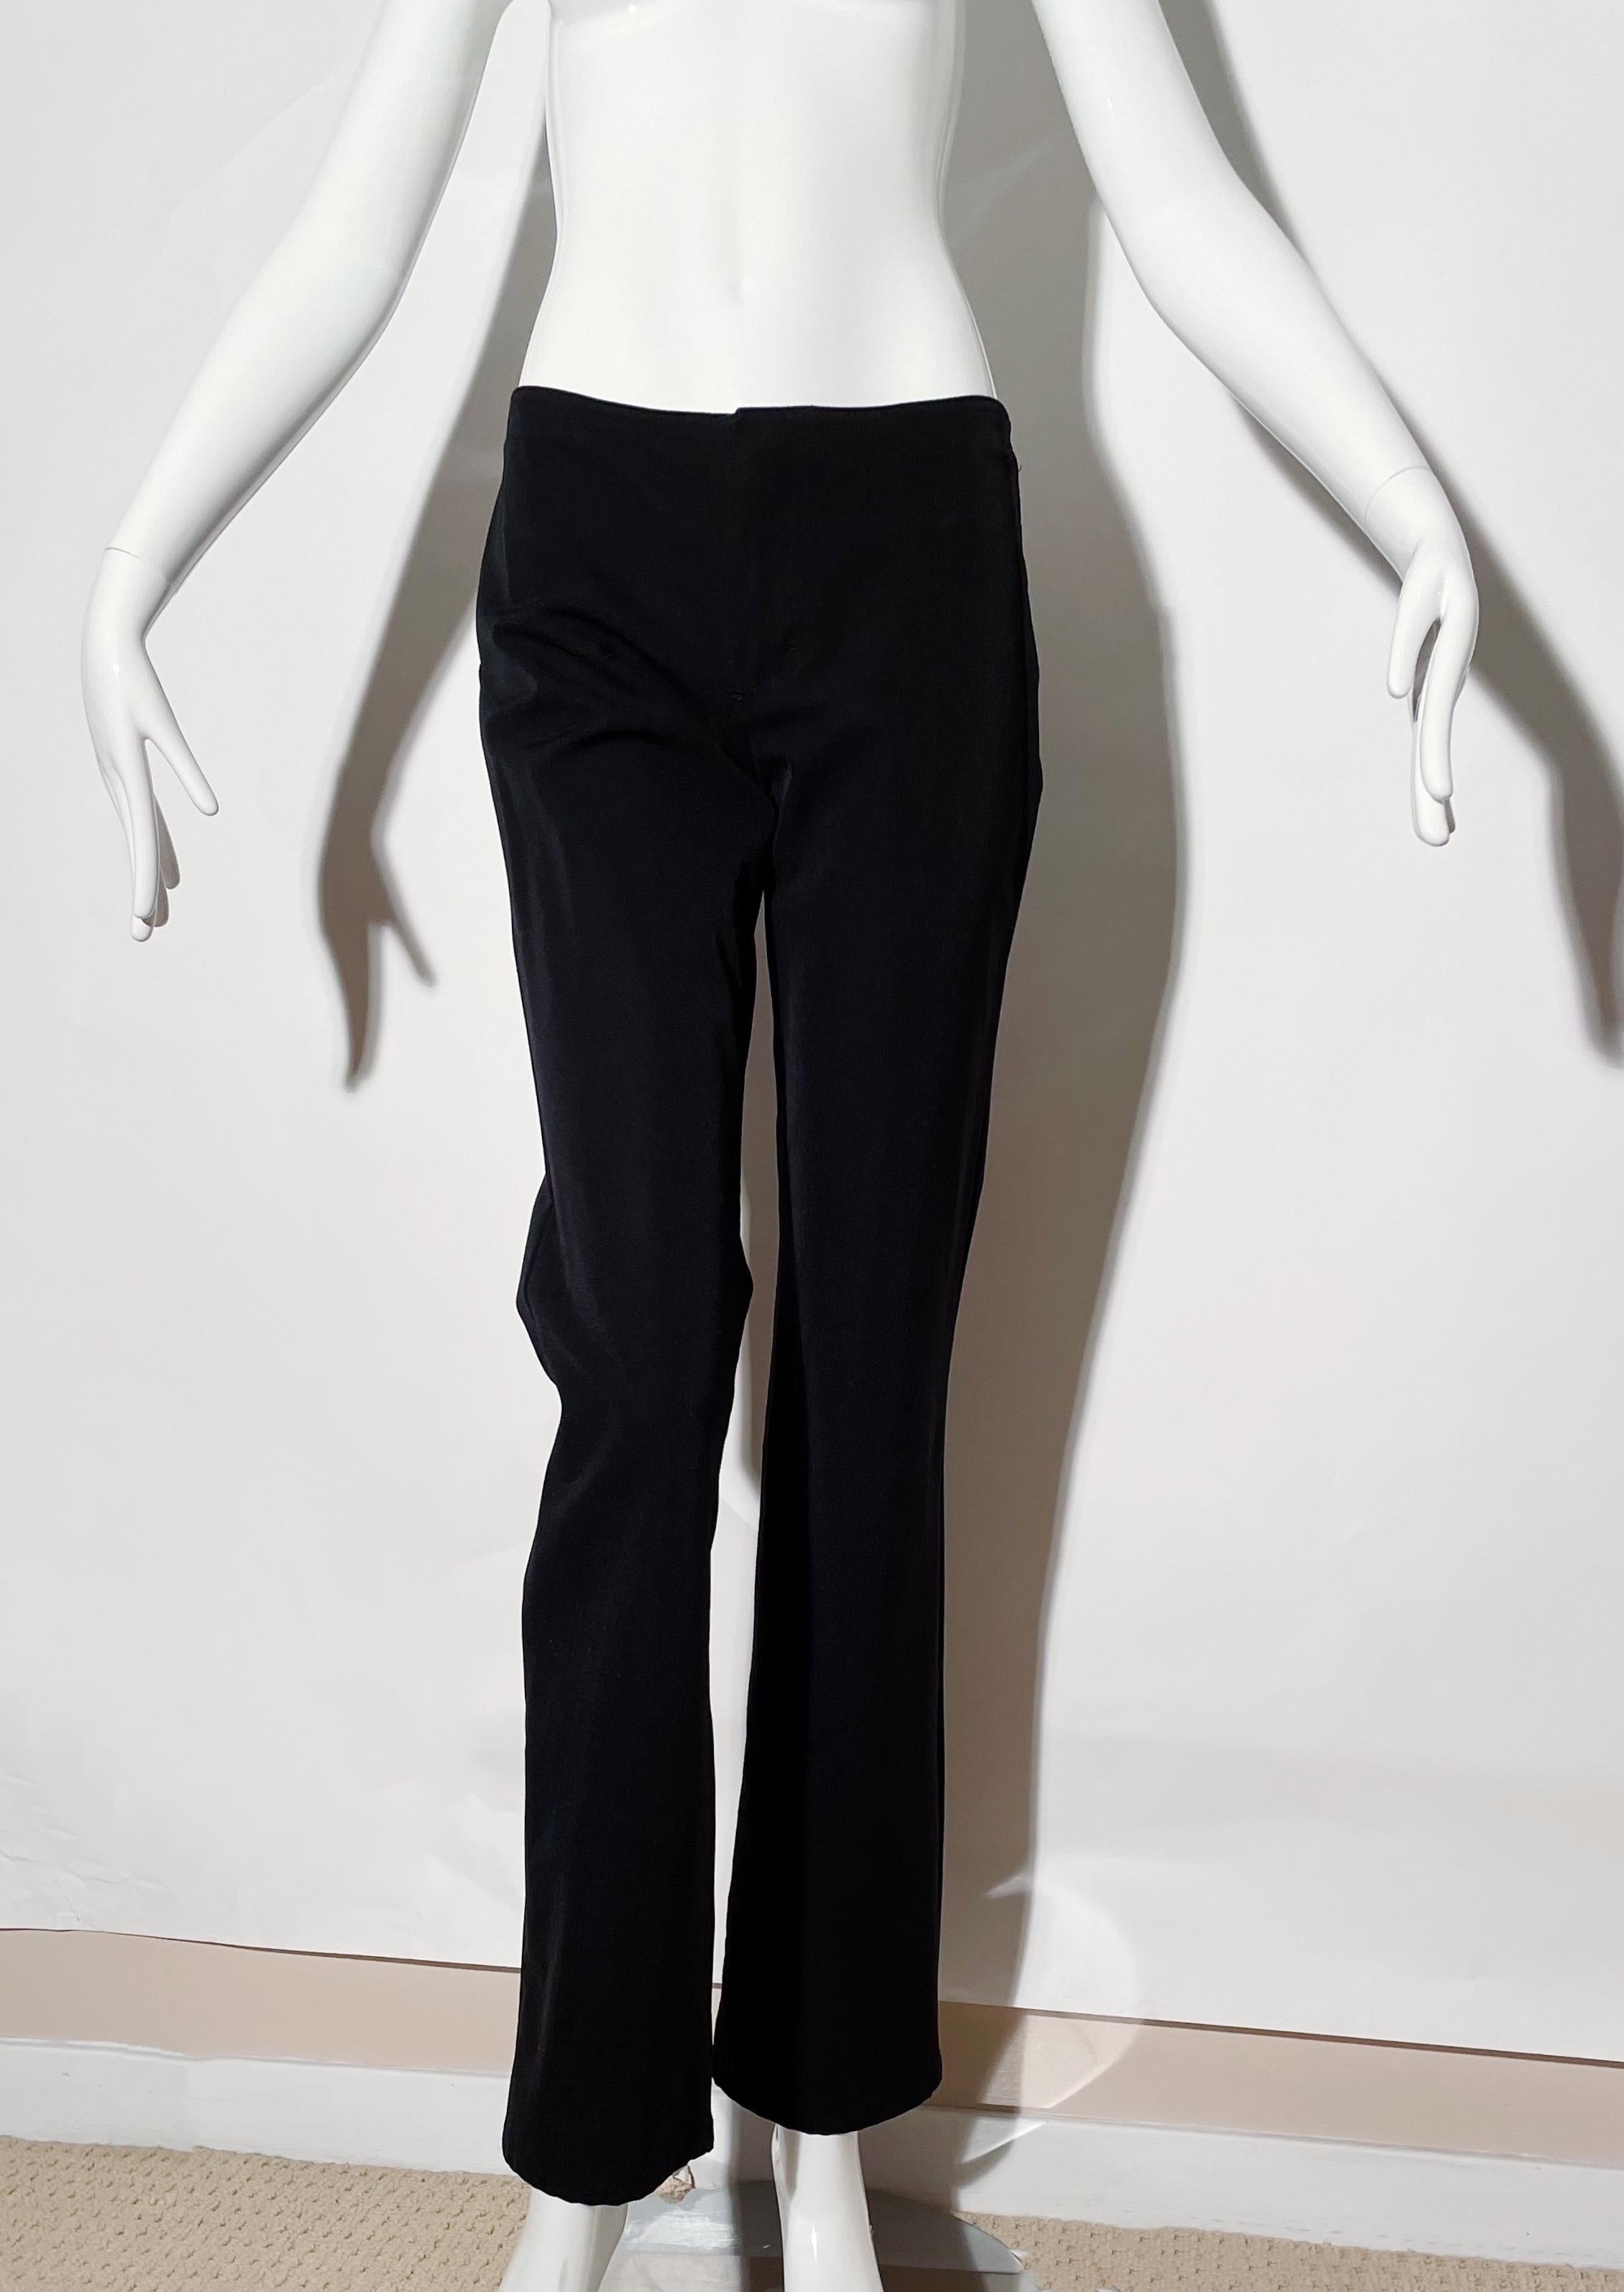 Black low rise pants. Front zipper closure. Rear pockets. Flare bootcut. Nylon and polyester. Made in Italy. 
*Condition: excellent vintage condition. No visible flaws.

Measurements Taken Laying Flat (inches)—
Waist: 26 in.
Hip: 30 in.
Rise: 8